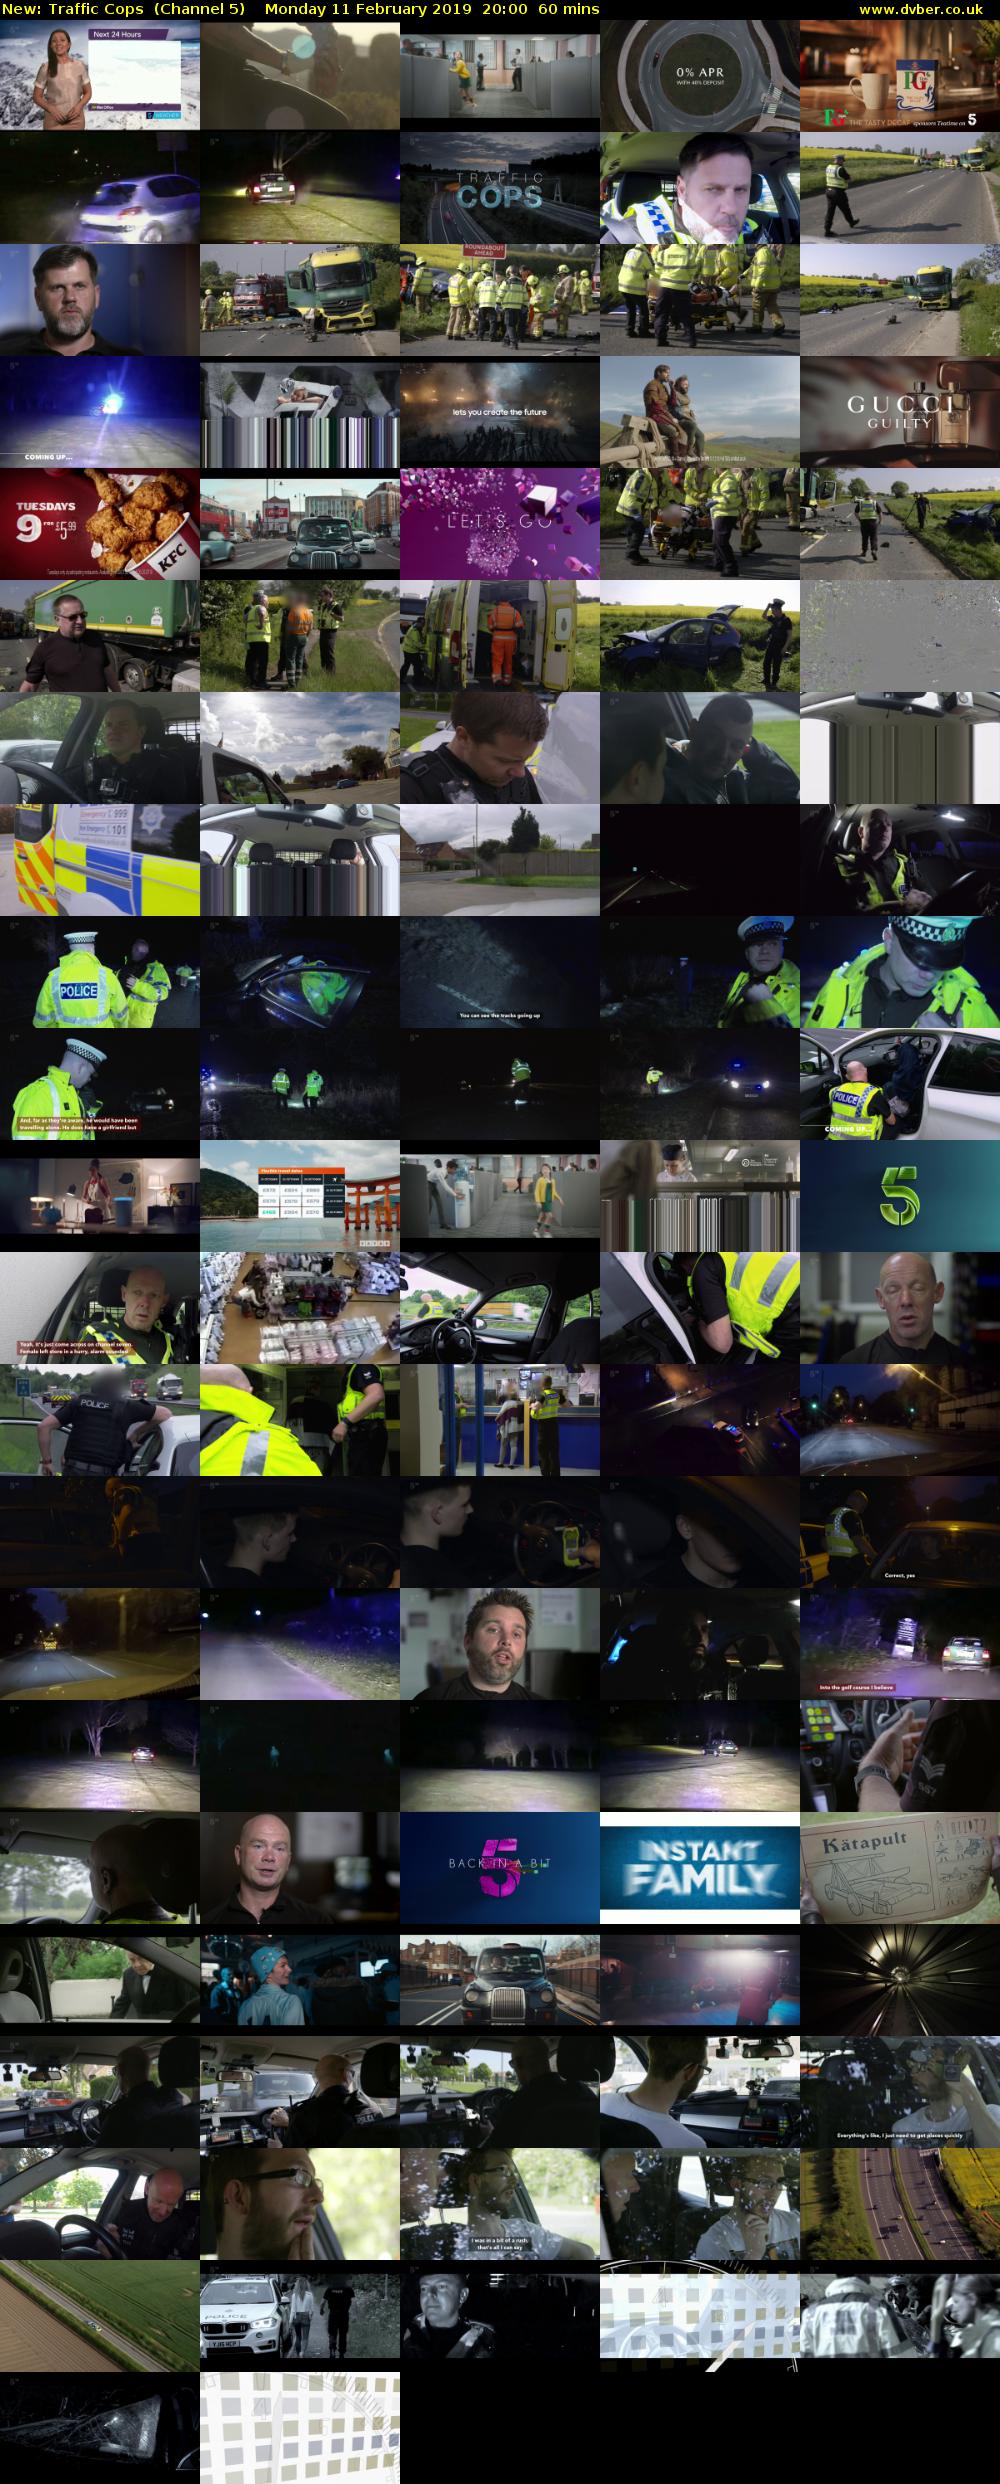 Traffic Cops (Channel 5) Monday 11 February 2019 20:00 - 21:00